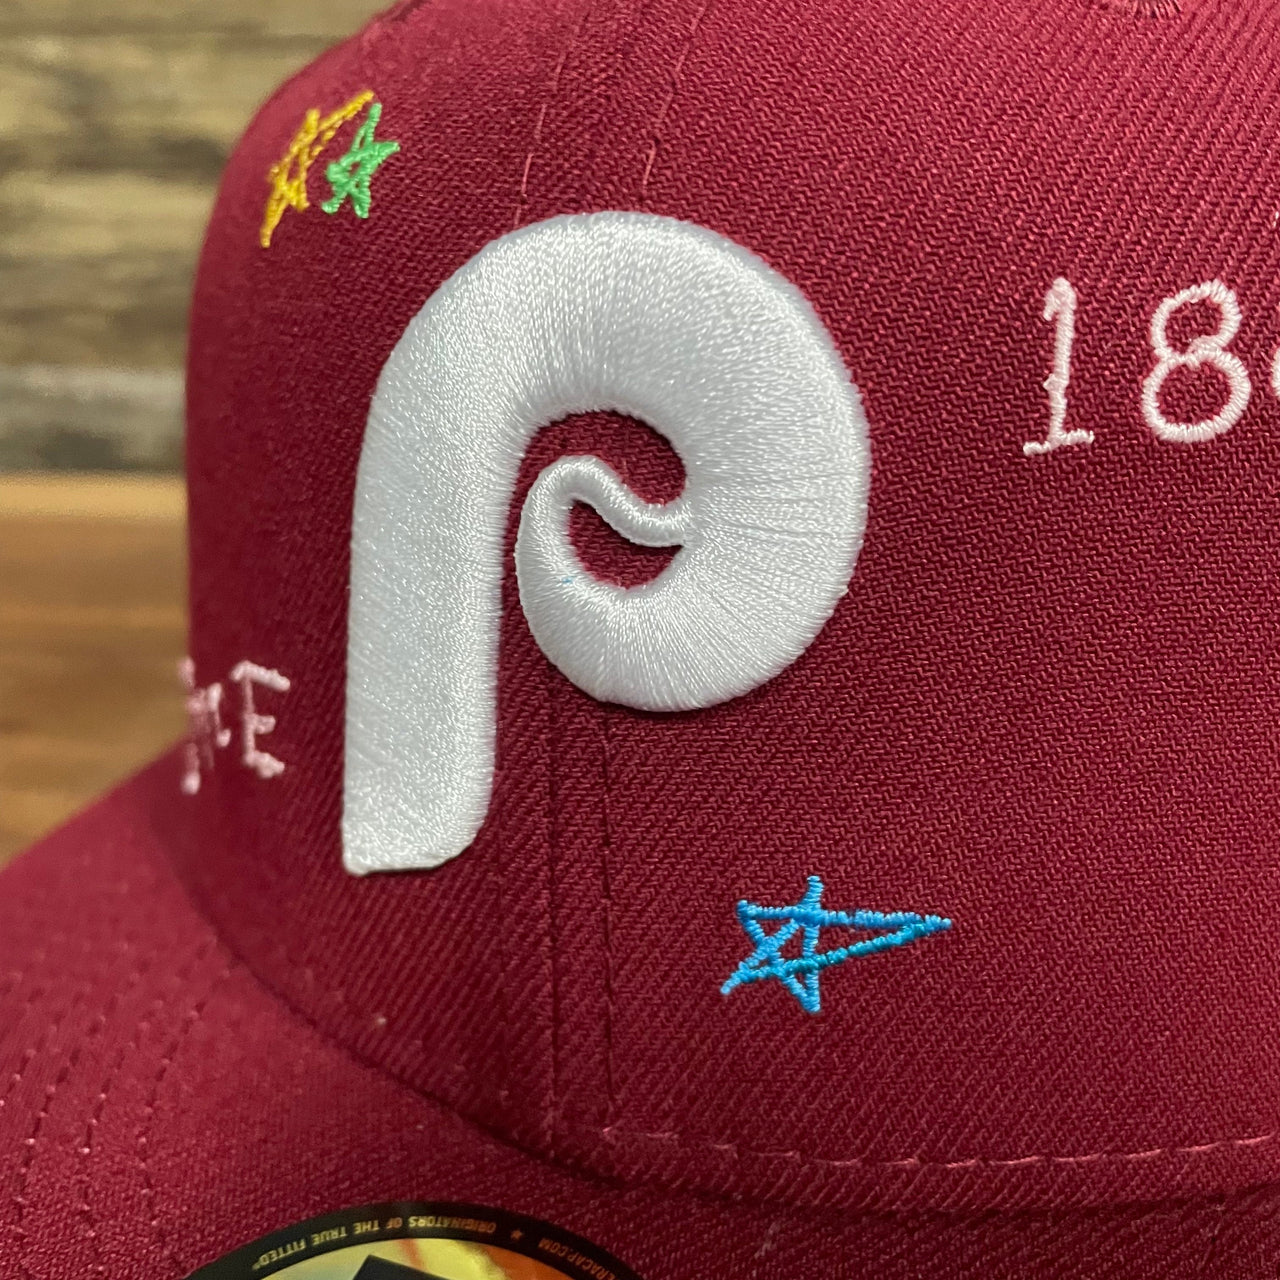 A closeup of the retro Phillies Cooperstown logo on the Philadelphia Phillies Cooperstown “Scribble” Side Patch Gray Bottom 59Fifty Fitted Cap